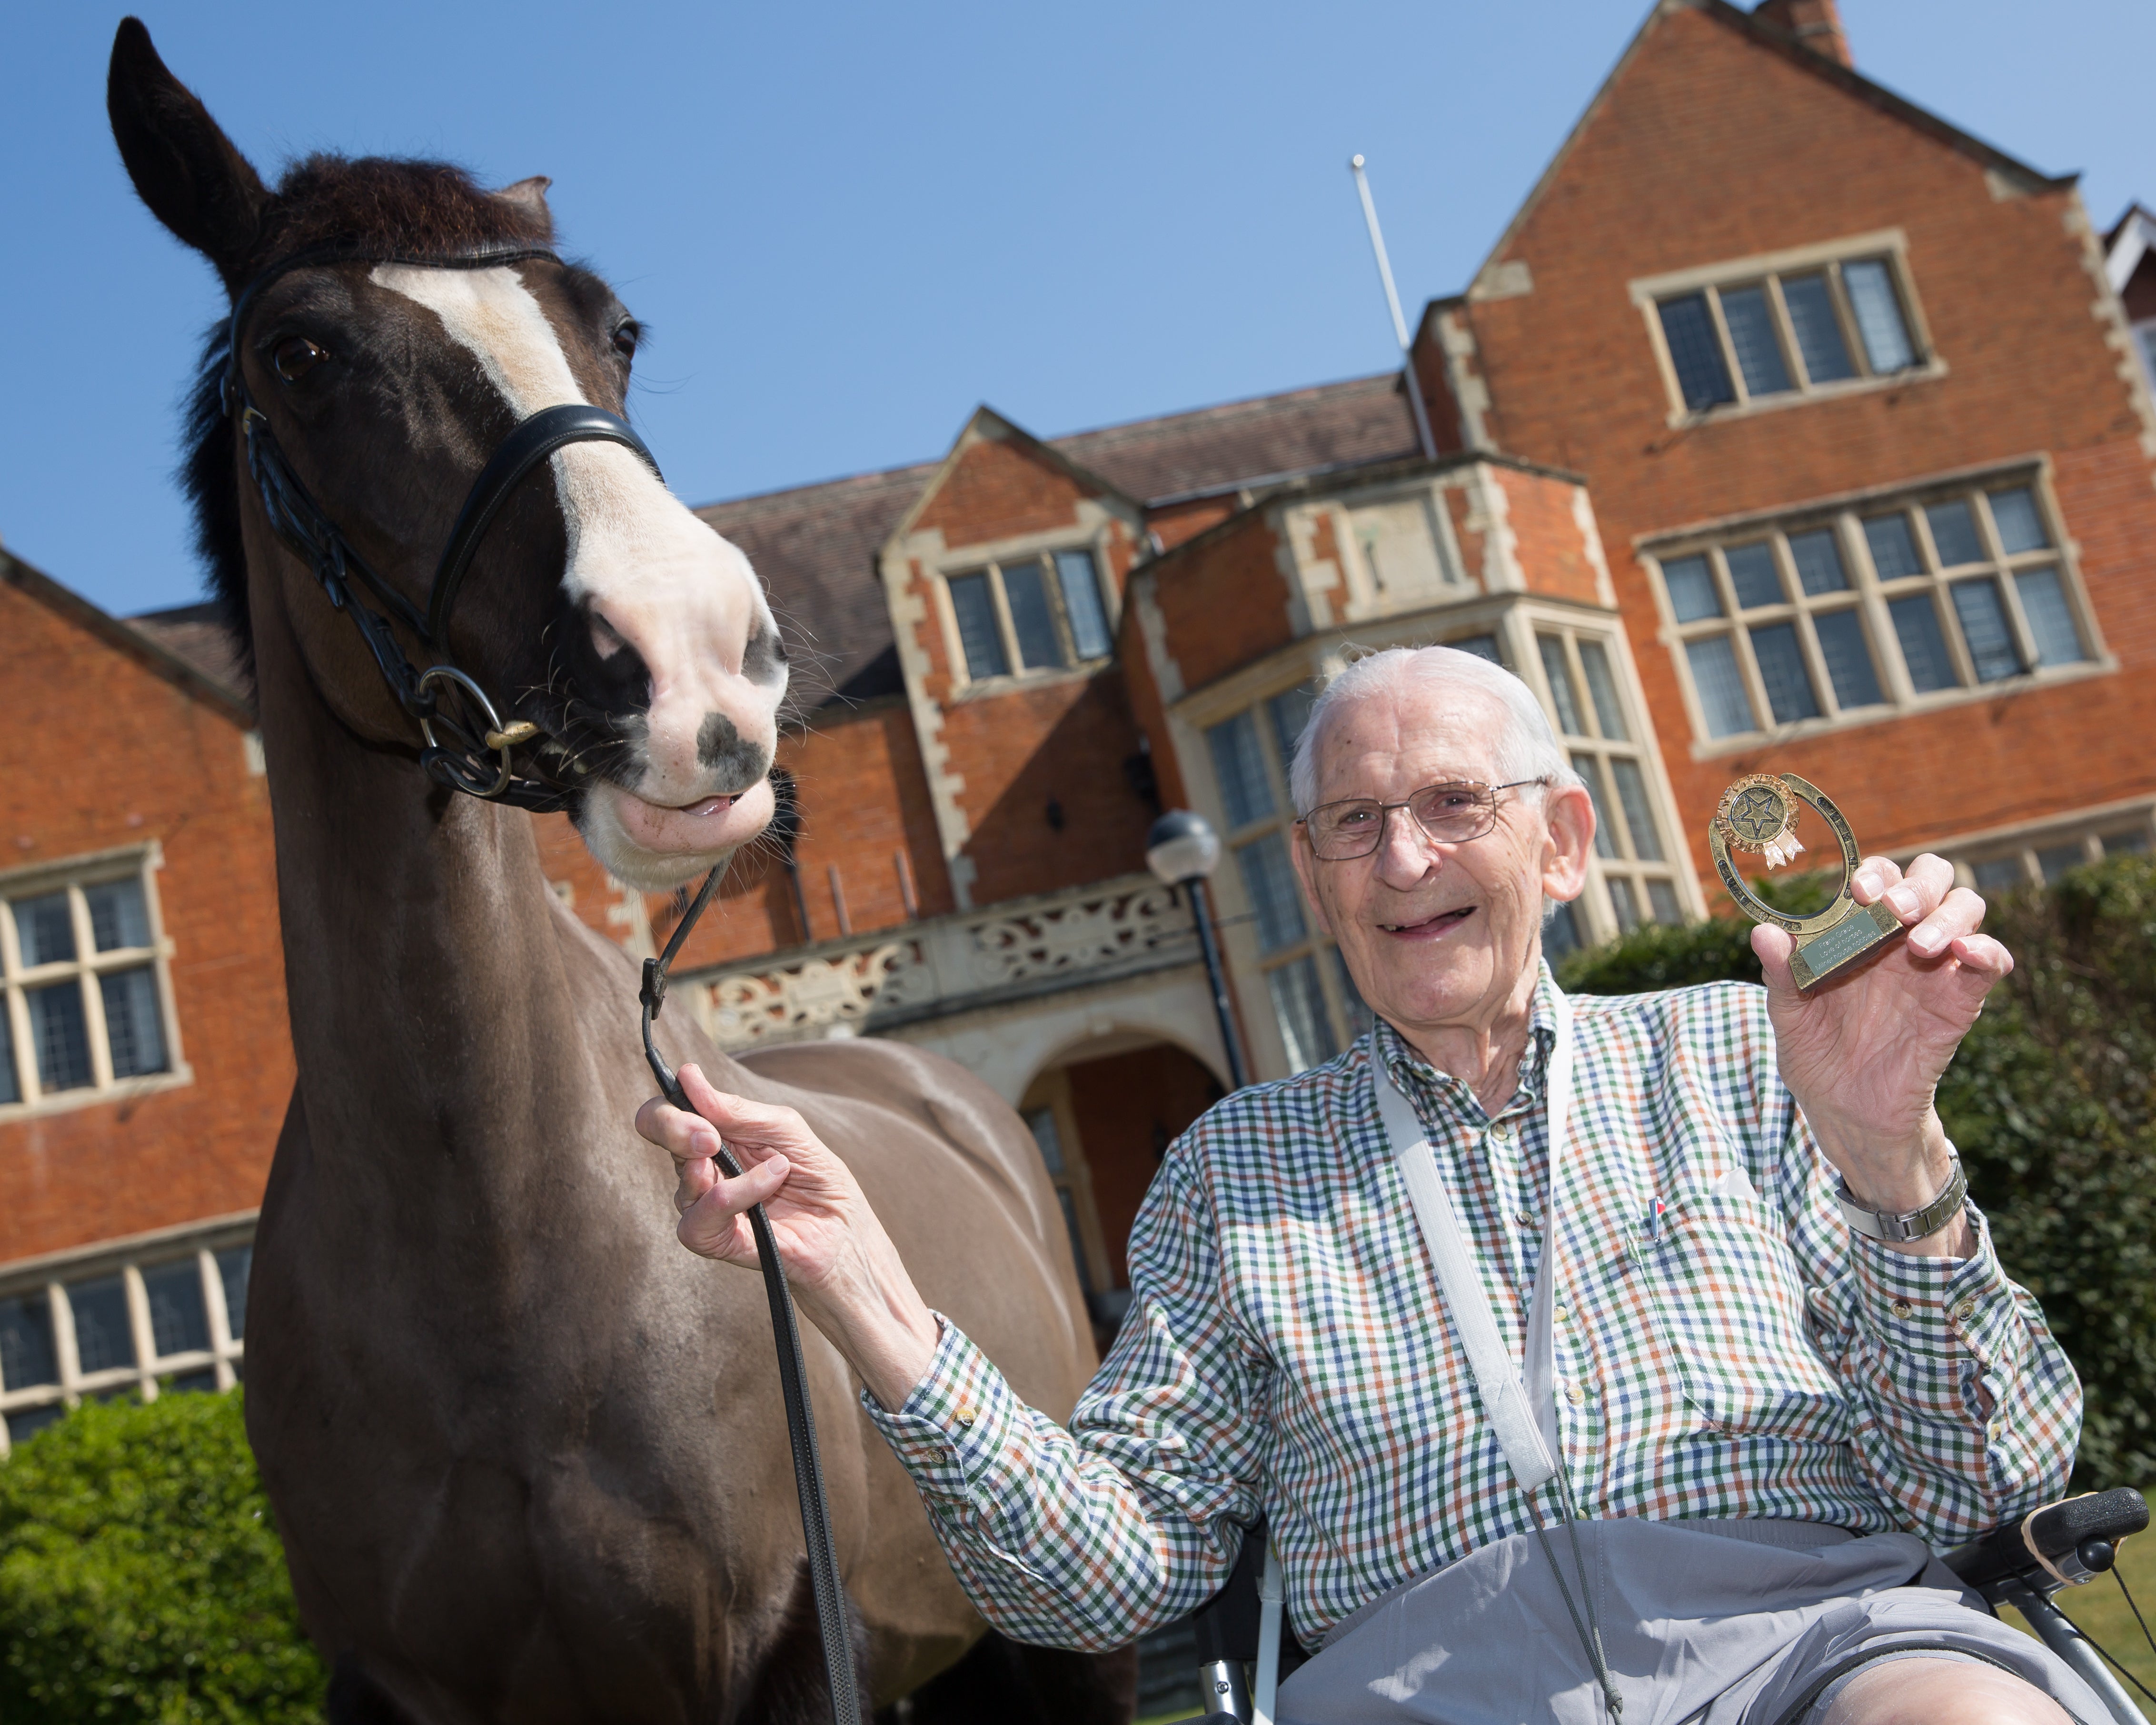 Frank Grace, 90, said meeting Rosie the horse made his day (Andrew Williams/Care UK/PA)